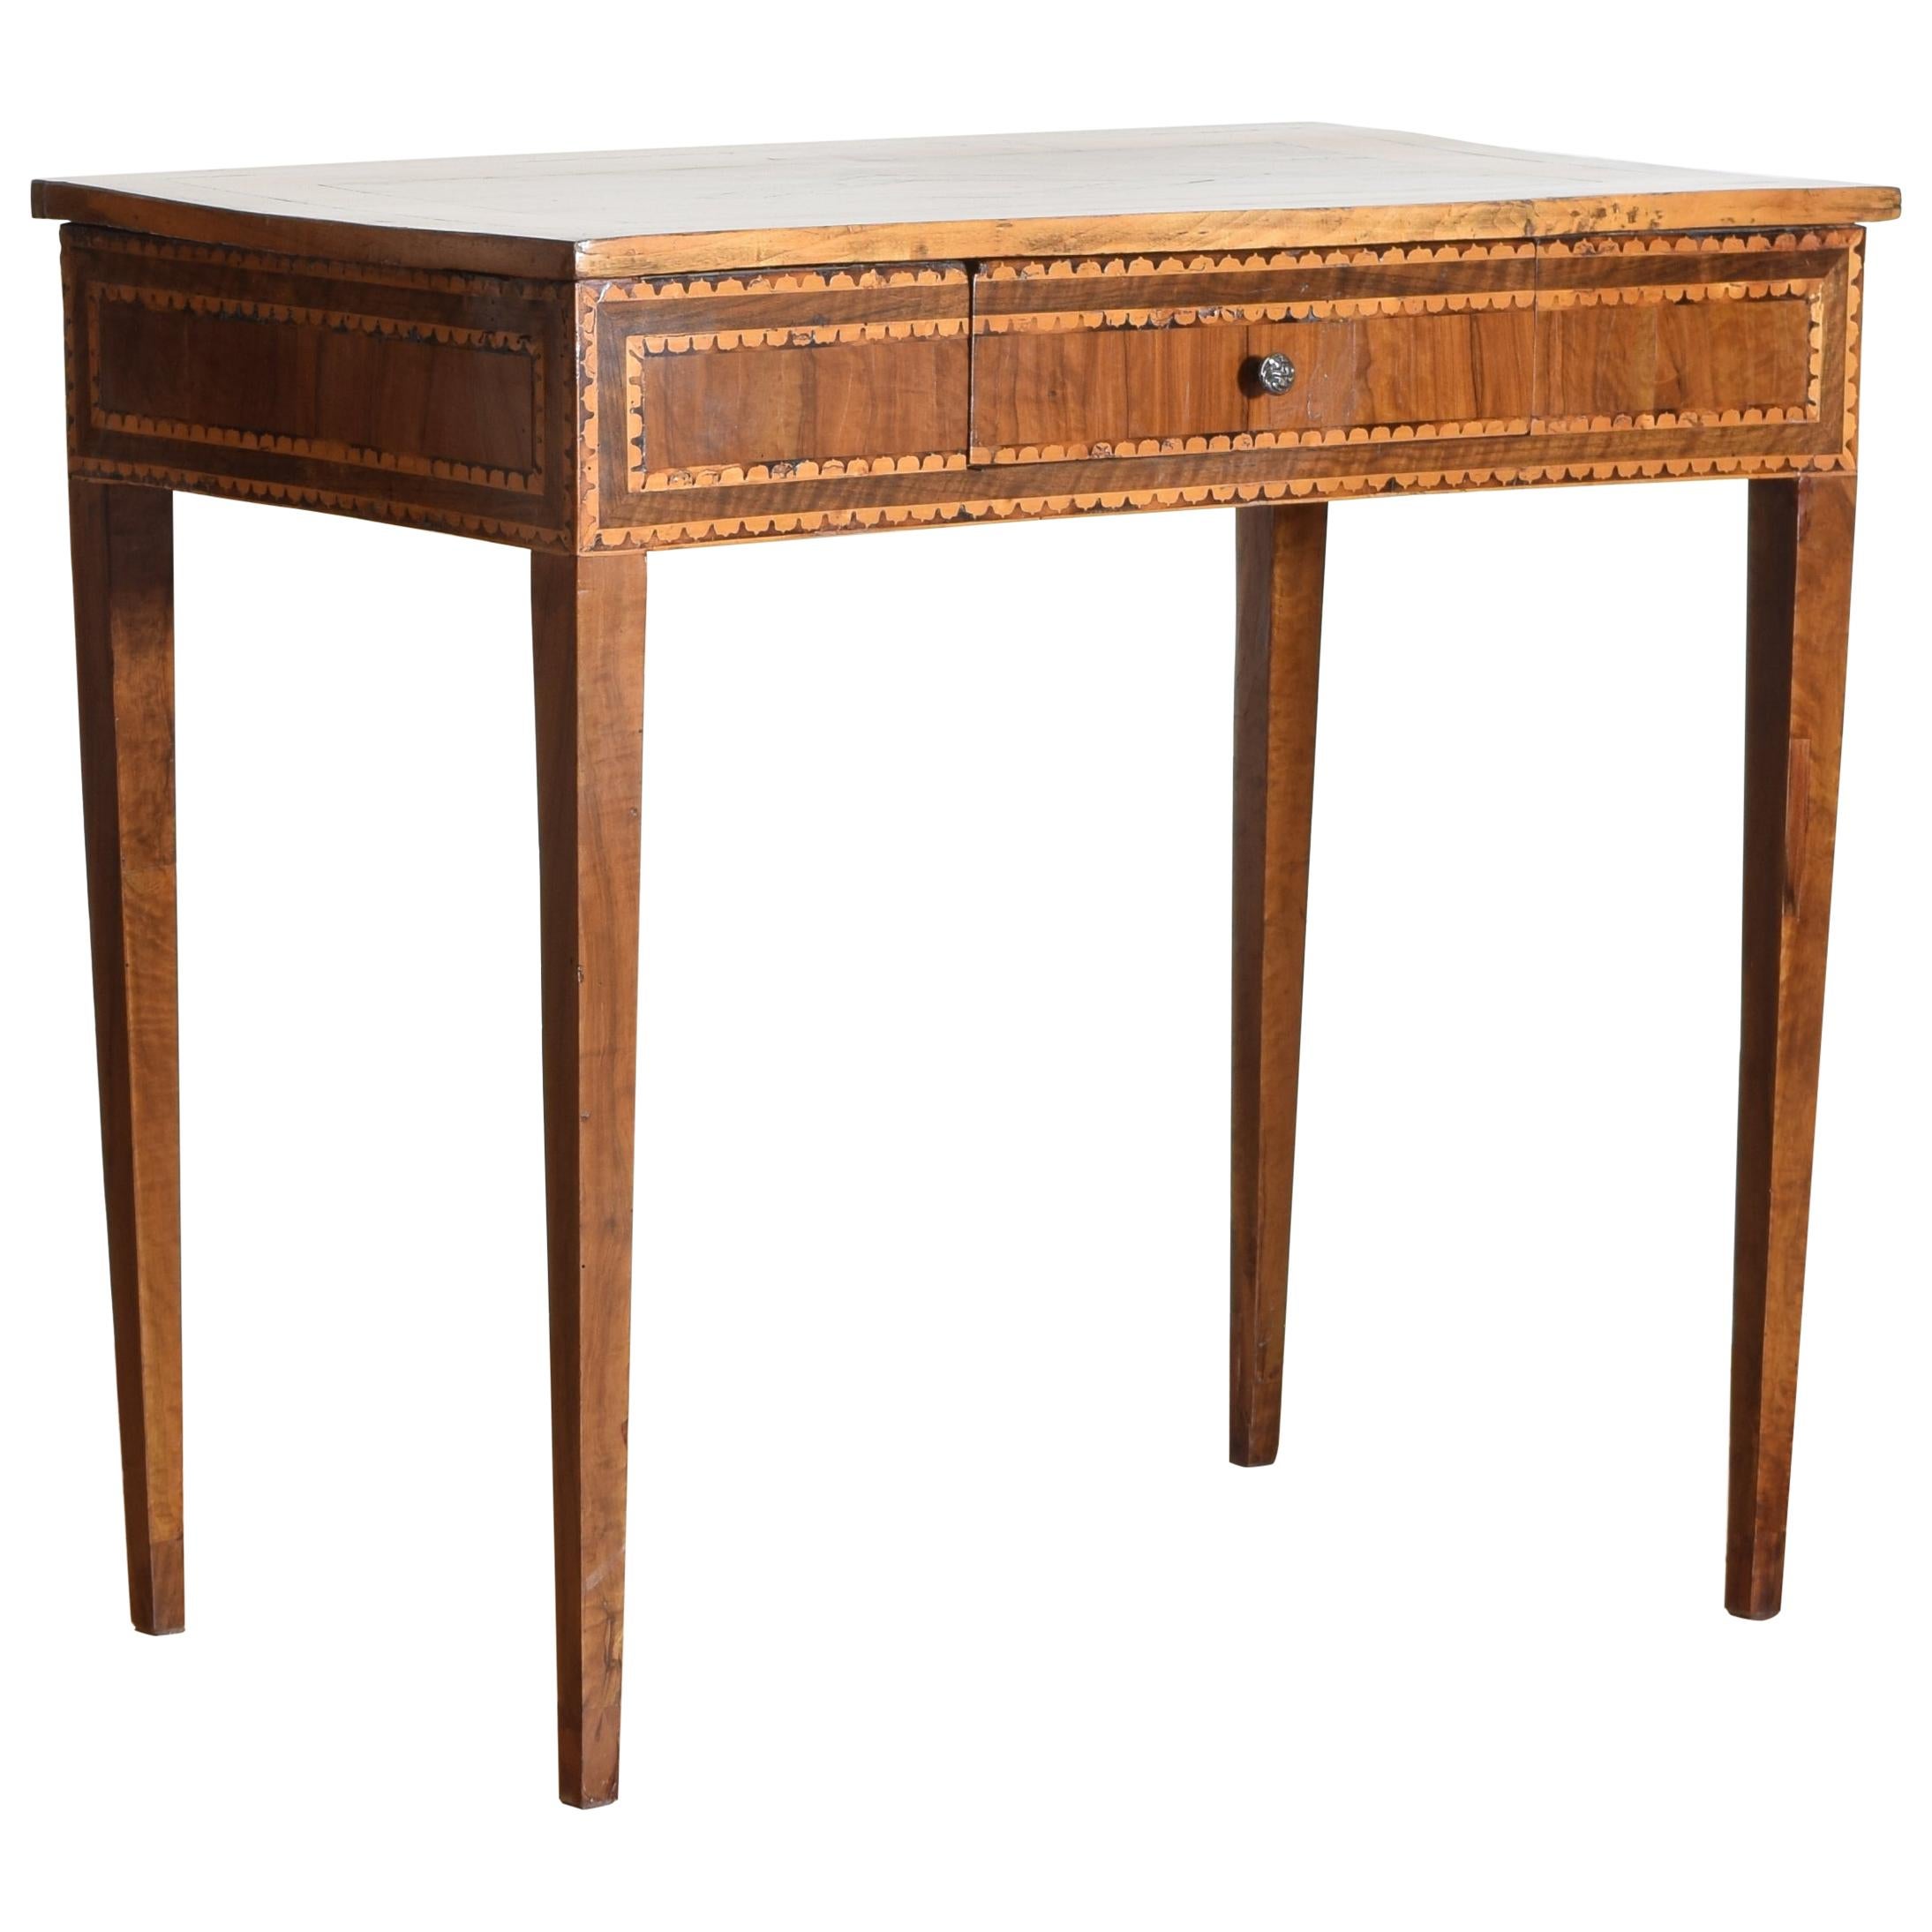 Italian Neoclassical Period Walnut and Inlaid 1-Drawer Writing Table ca1820-1830